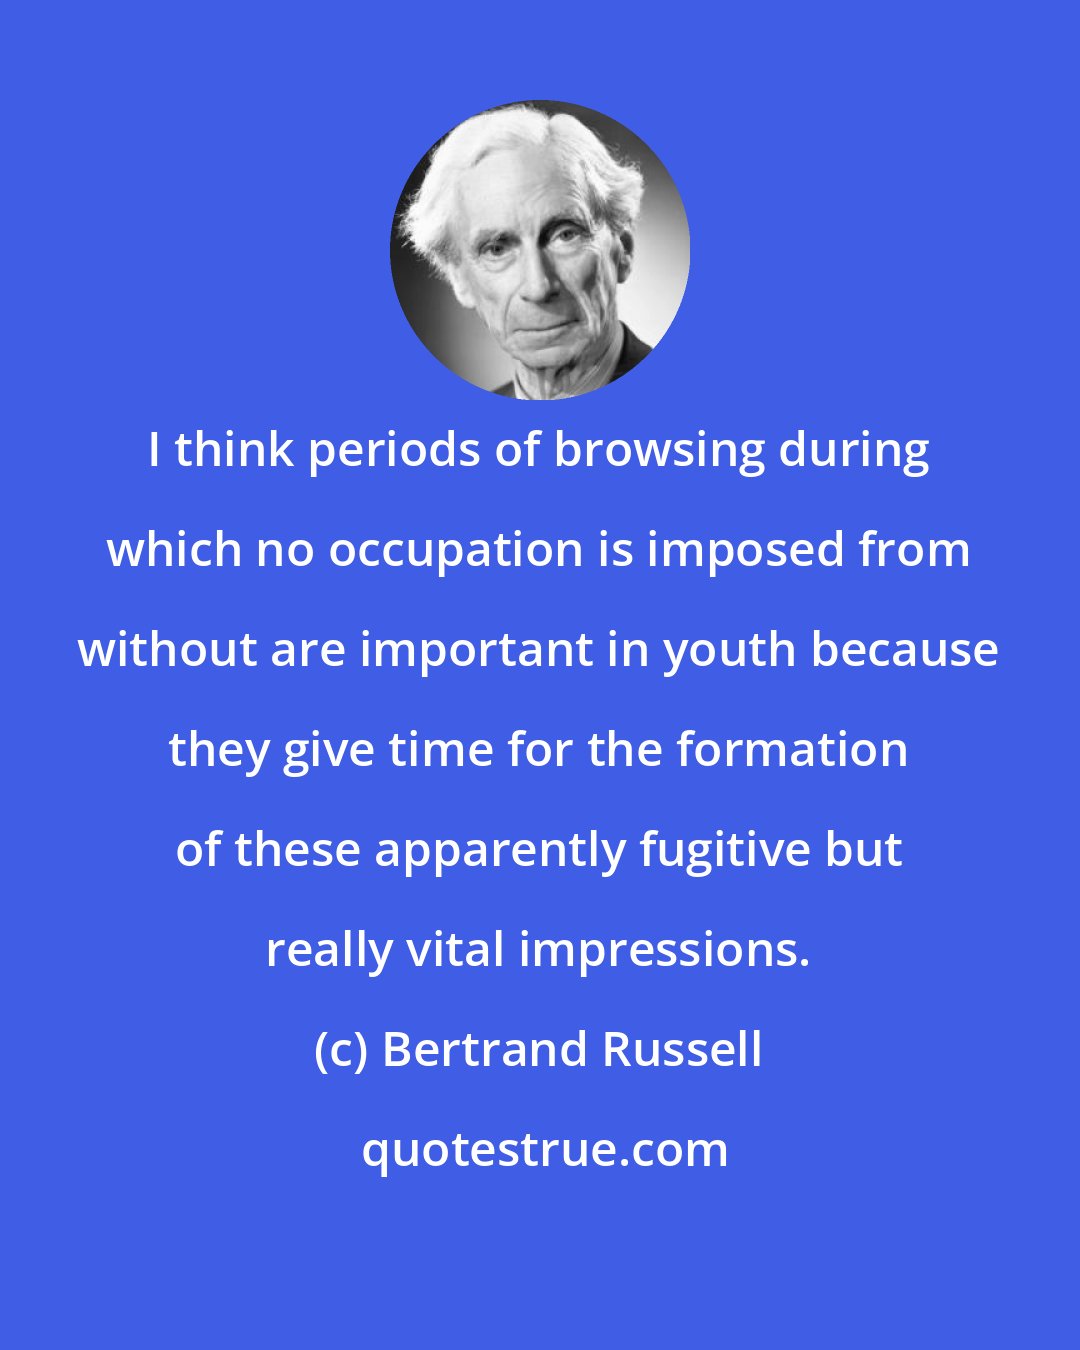 Bertrand Russell: I think periods of browsing during which no occupation is imposed from without are important in youth because they give time for the formation of these apparently fugitive but really vital impressions.